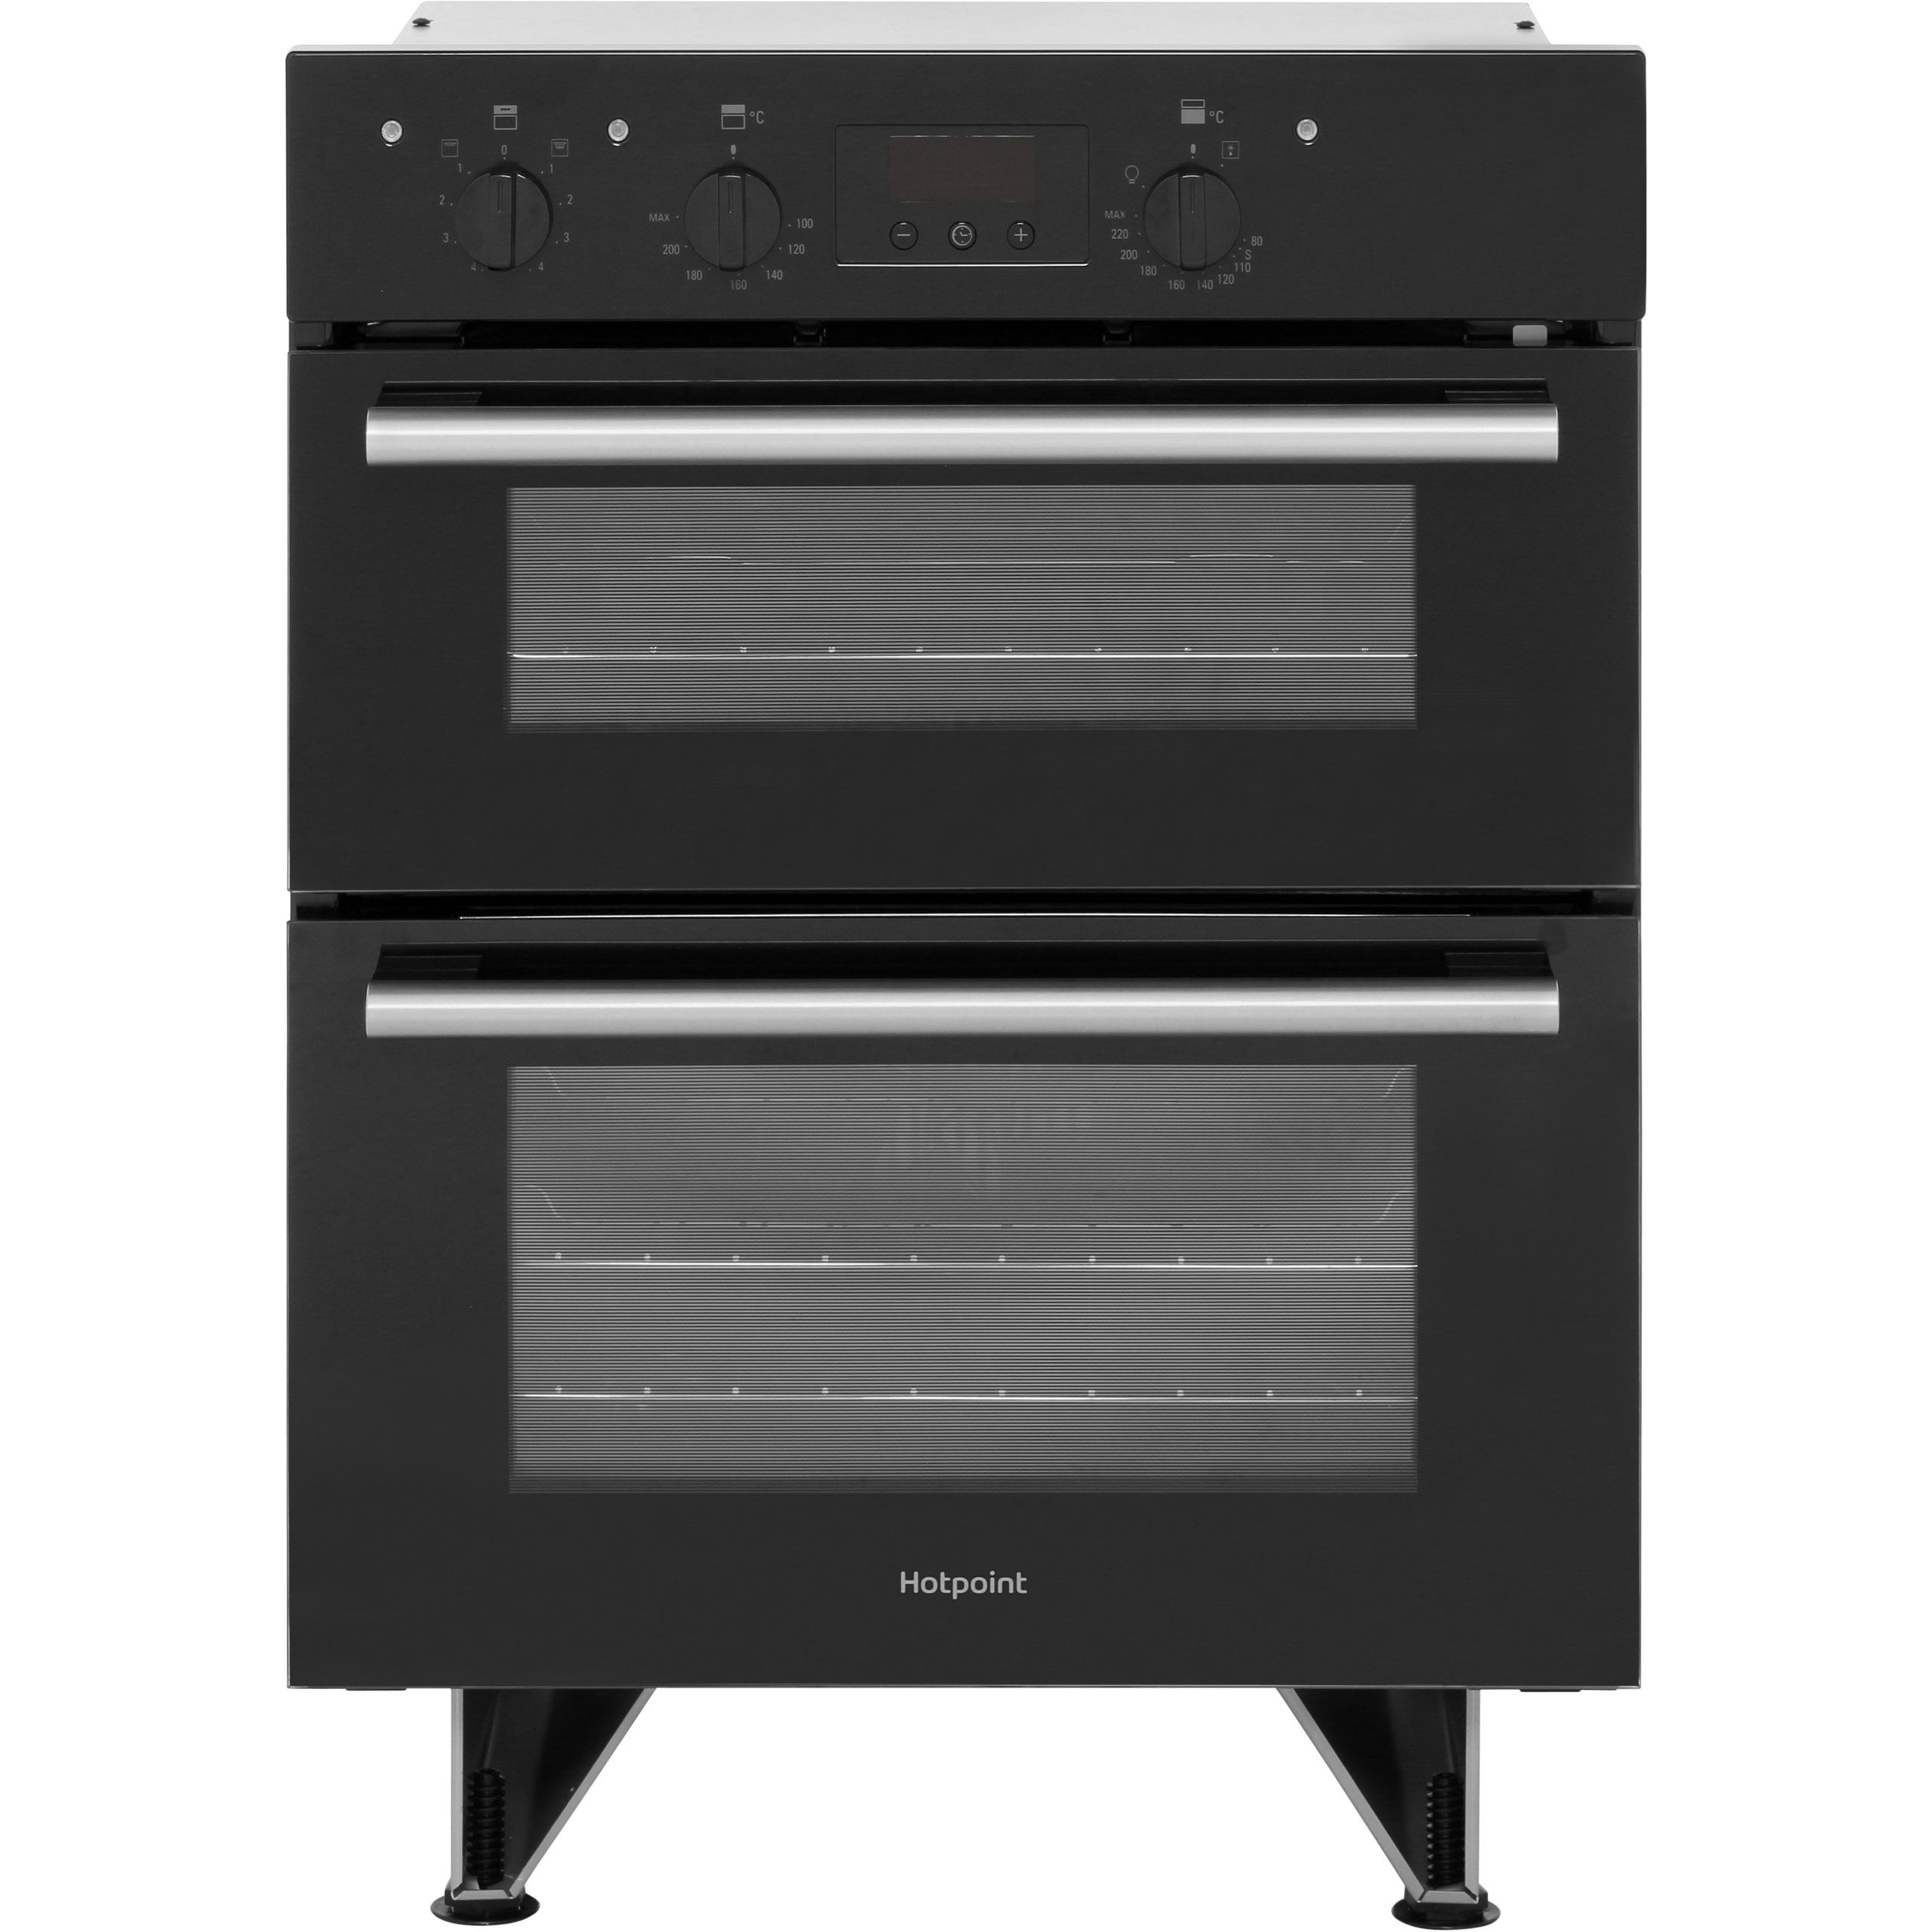 Hotpoint Class 2 DU2540BL Built Under Electric Double Oven With Feet - Black - A/A Rated, Black